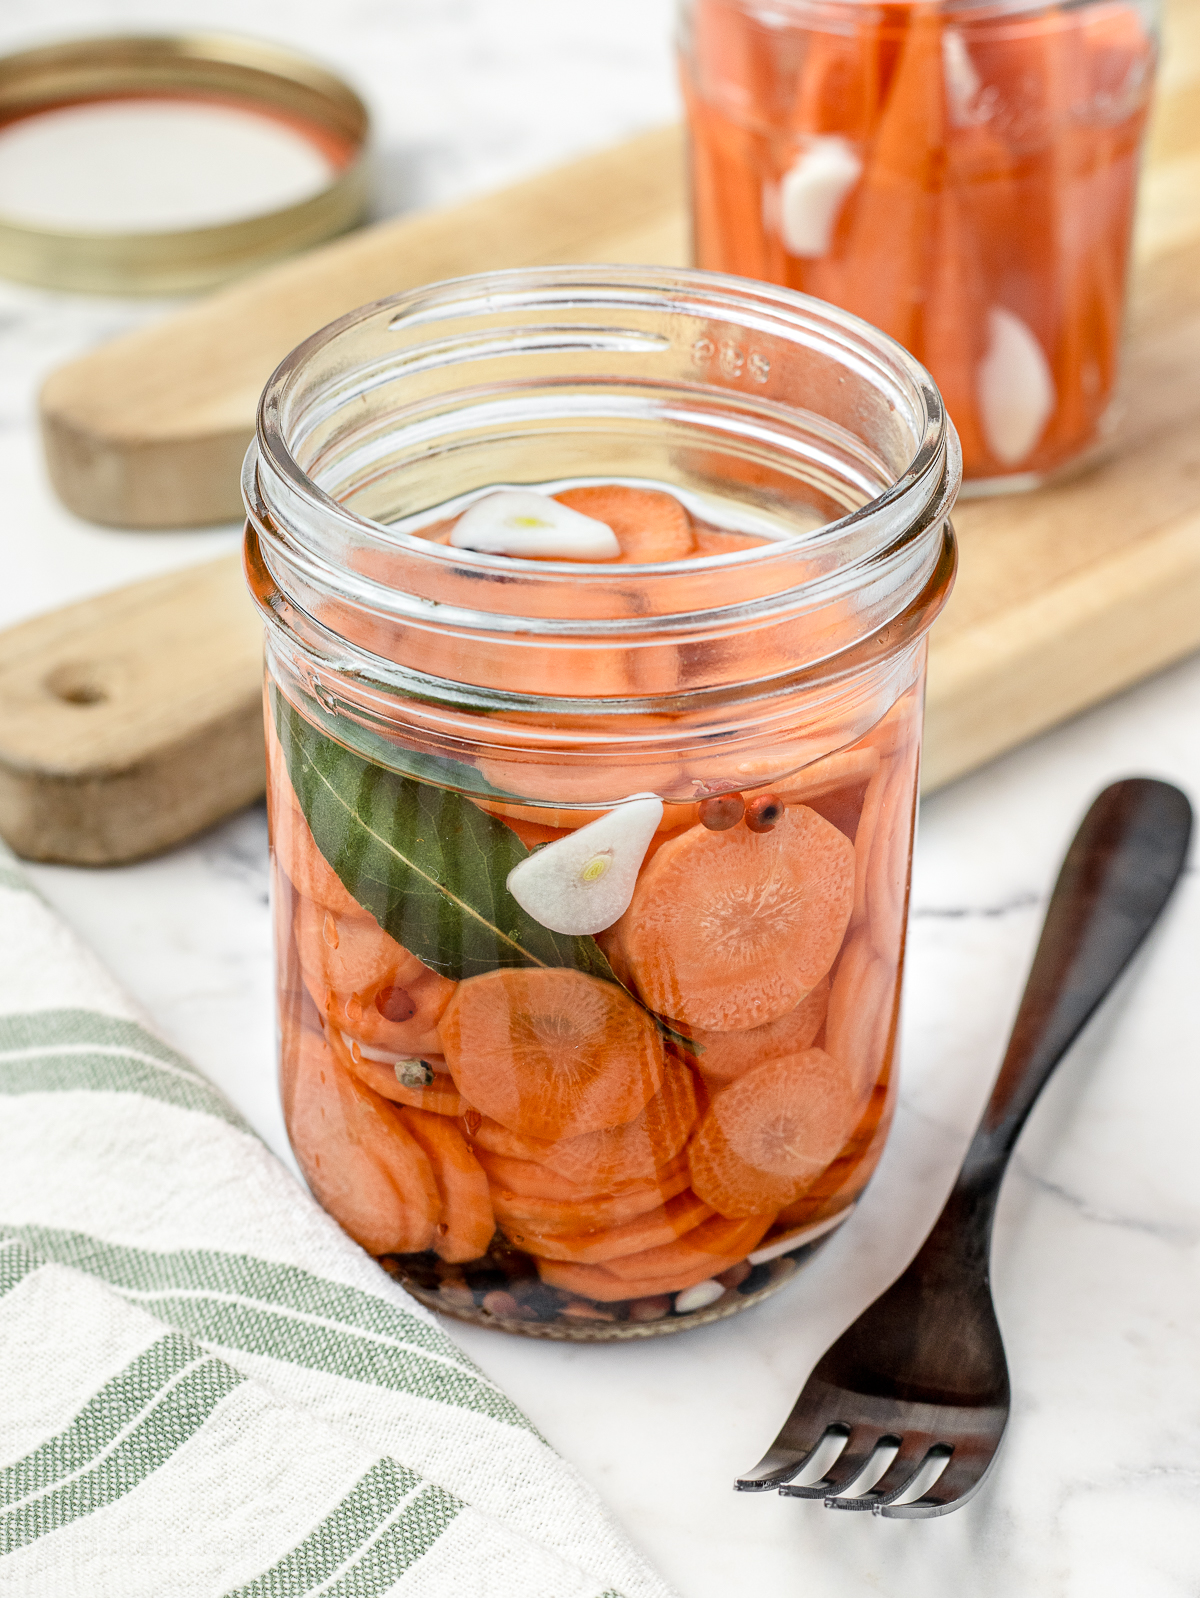 Two jars of quick pickled carrots seasoned with garlic cloves, peppercorns, and bay leaves. One jar has carrot sticks, the other has sliced carrots.